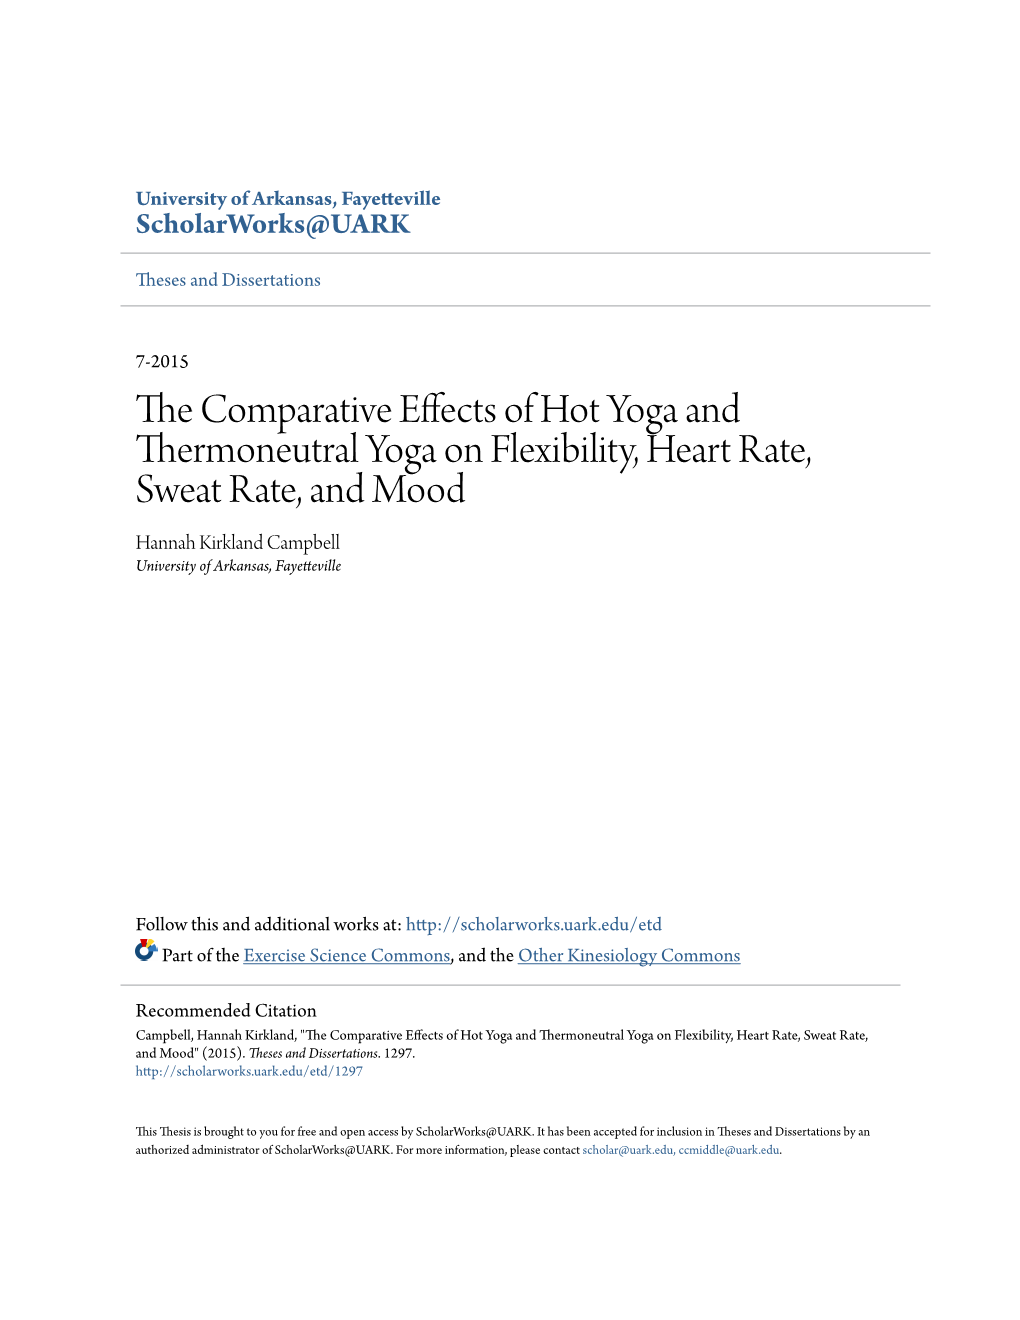 The Comparative Effects of Hot Yoga and Thermoneutral Yoga on Flexibility, Heart Rate, Sweat Rate, and Mood